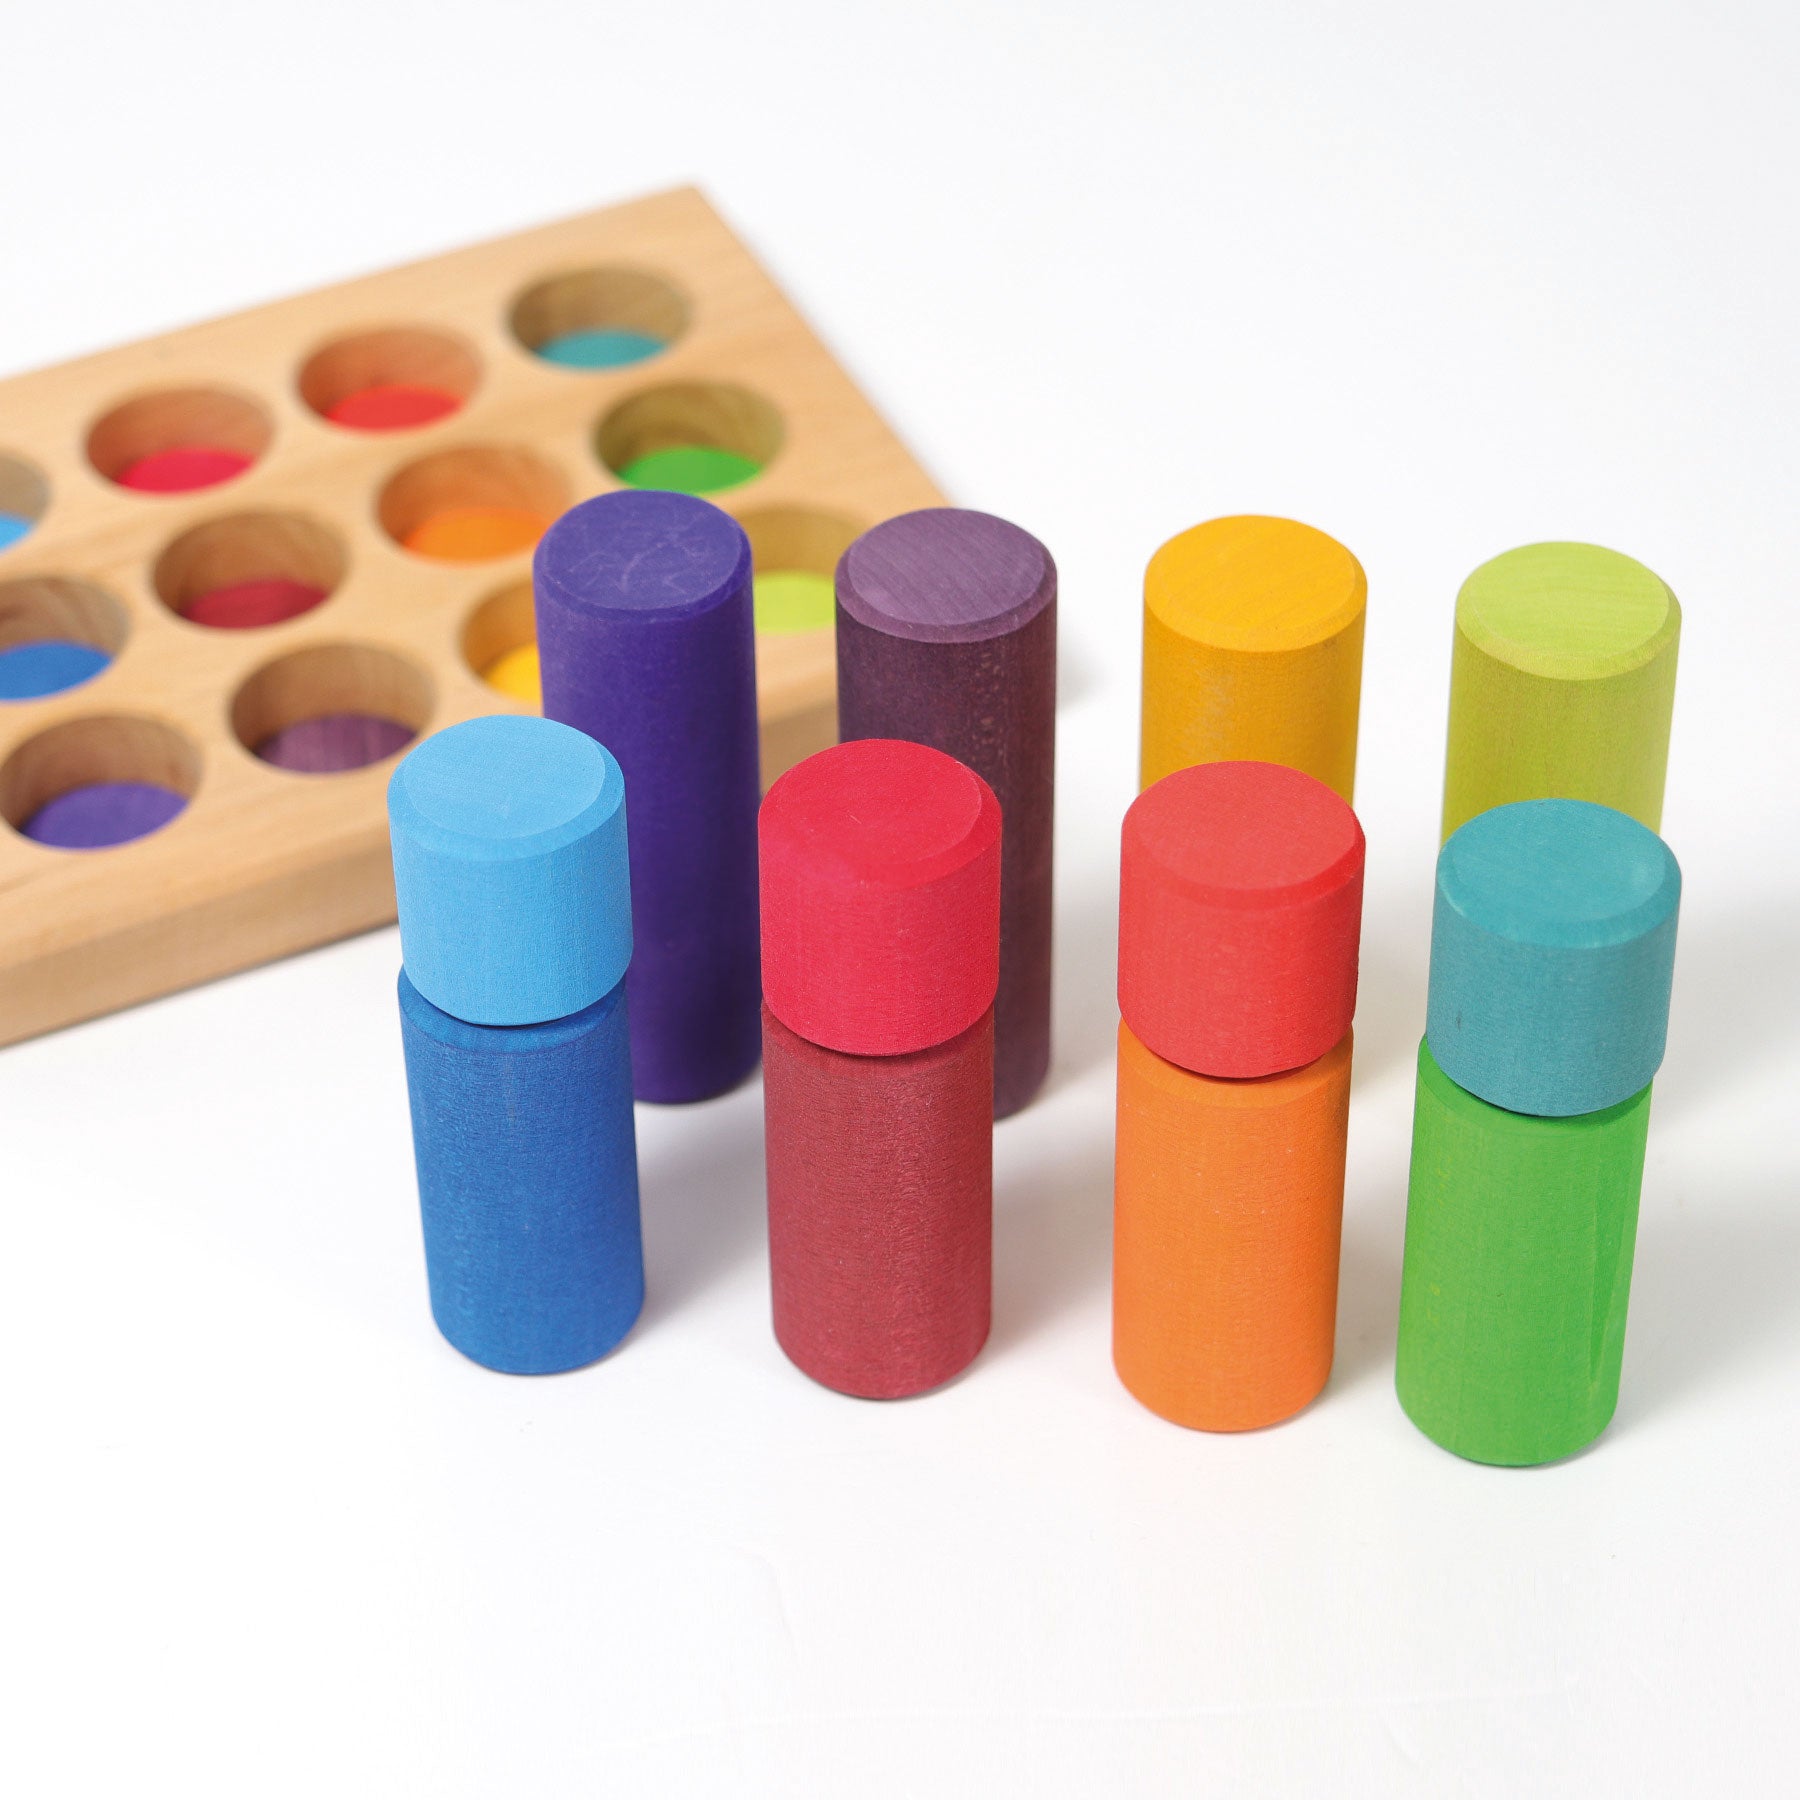 Grimm's Stacking Game Small Rainbow Rollers - Bueno Blocks